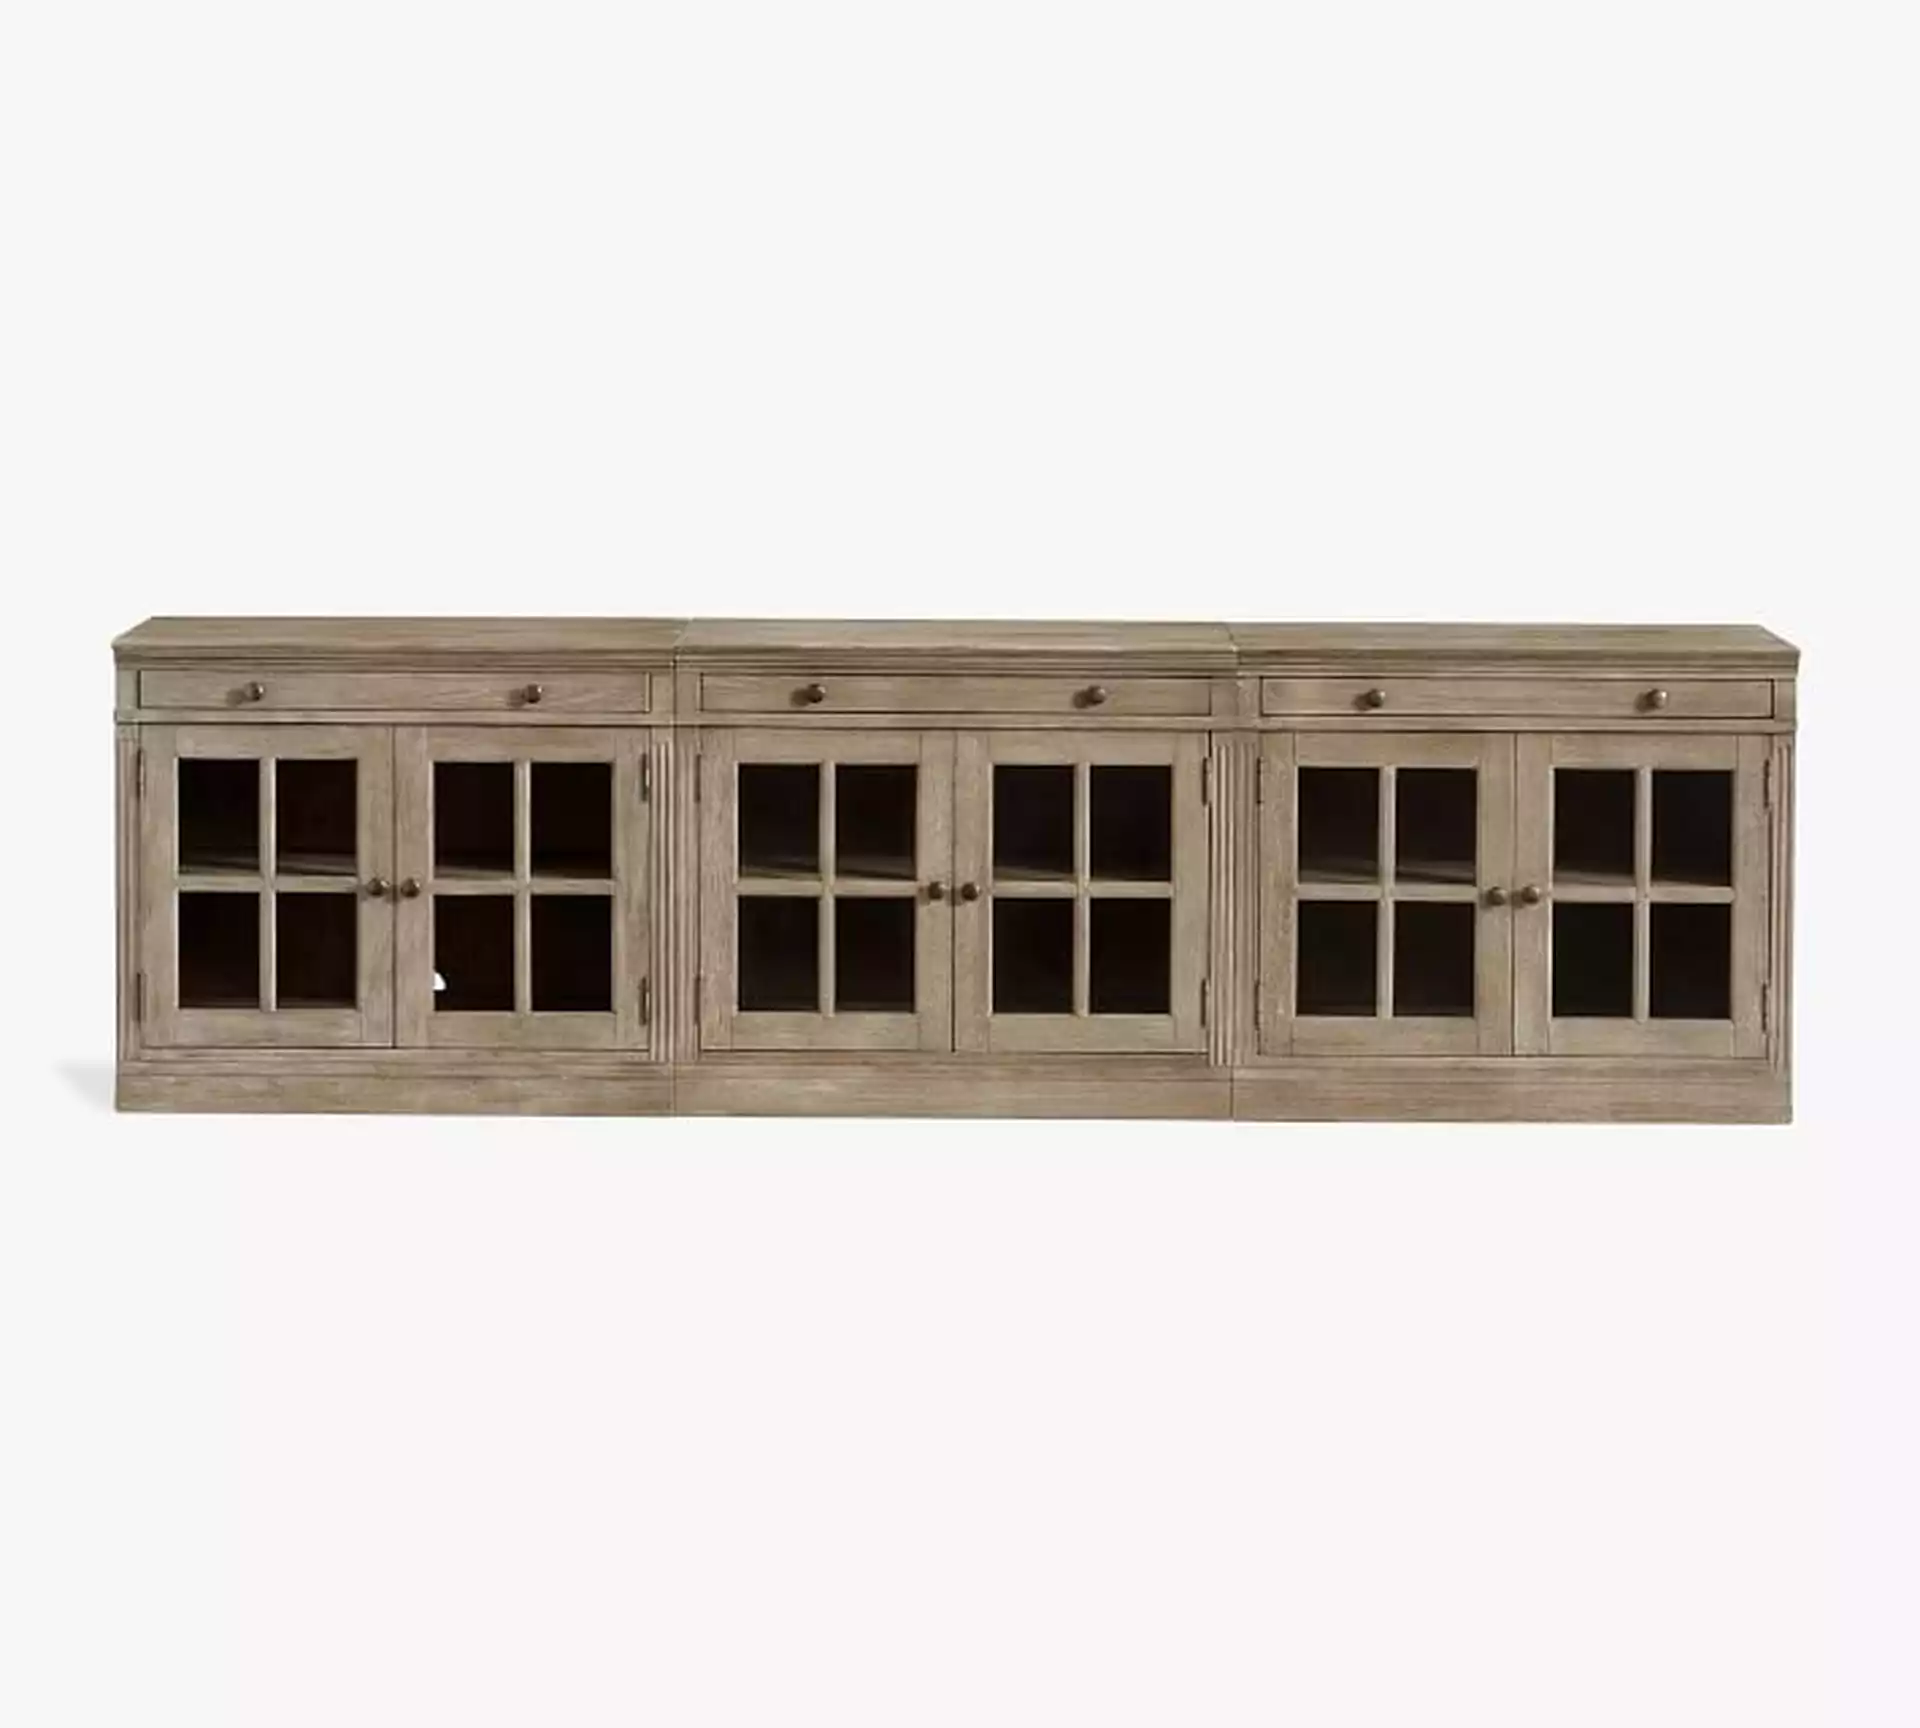 Livingston 105" Media Console with Glass Door Cabinets, Gray Wash